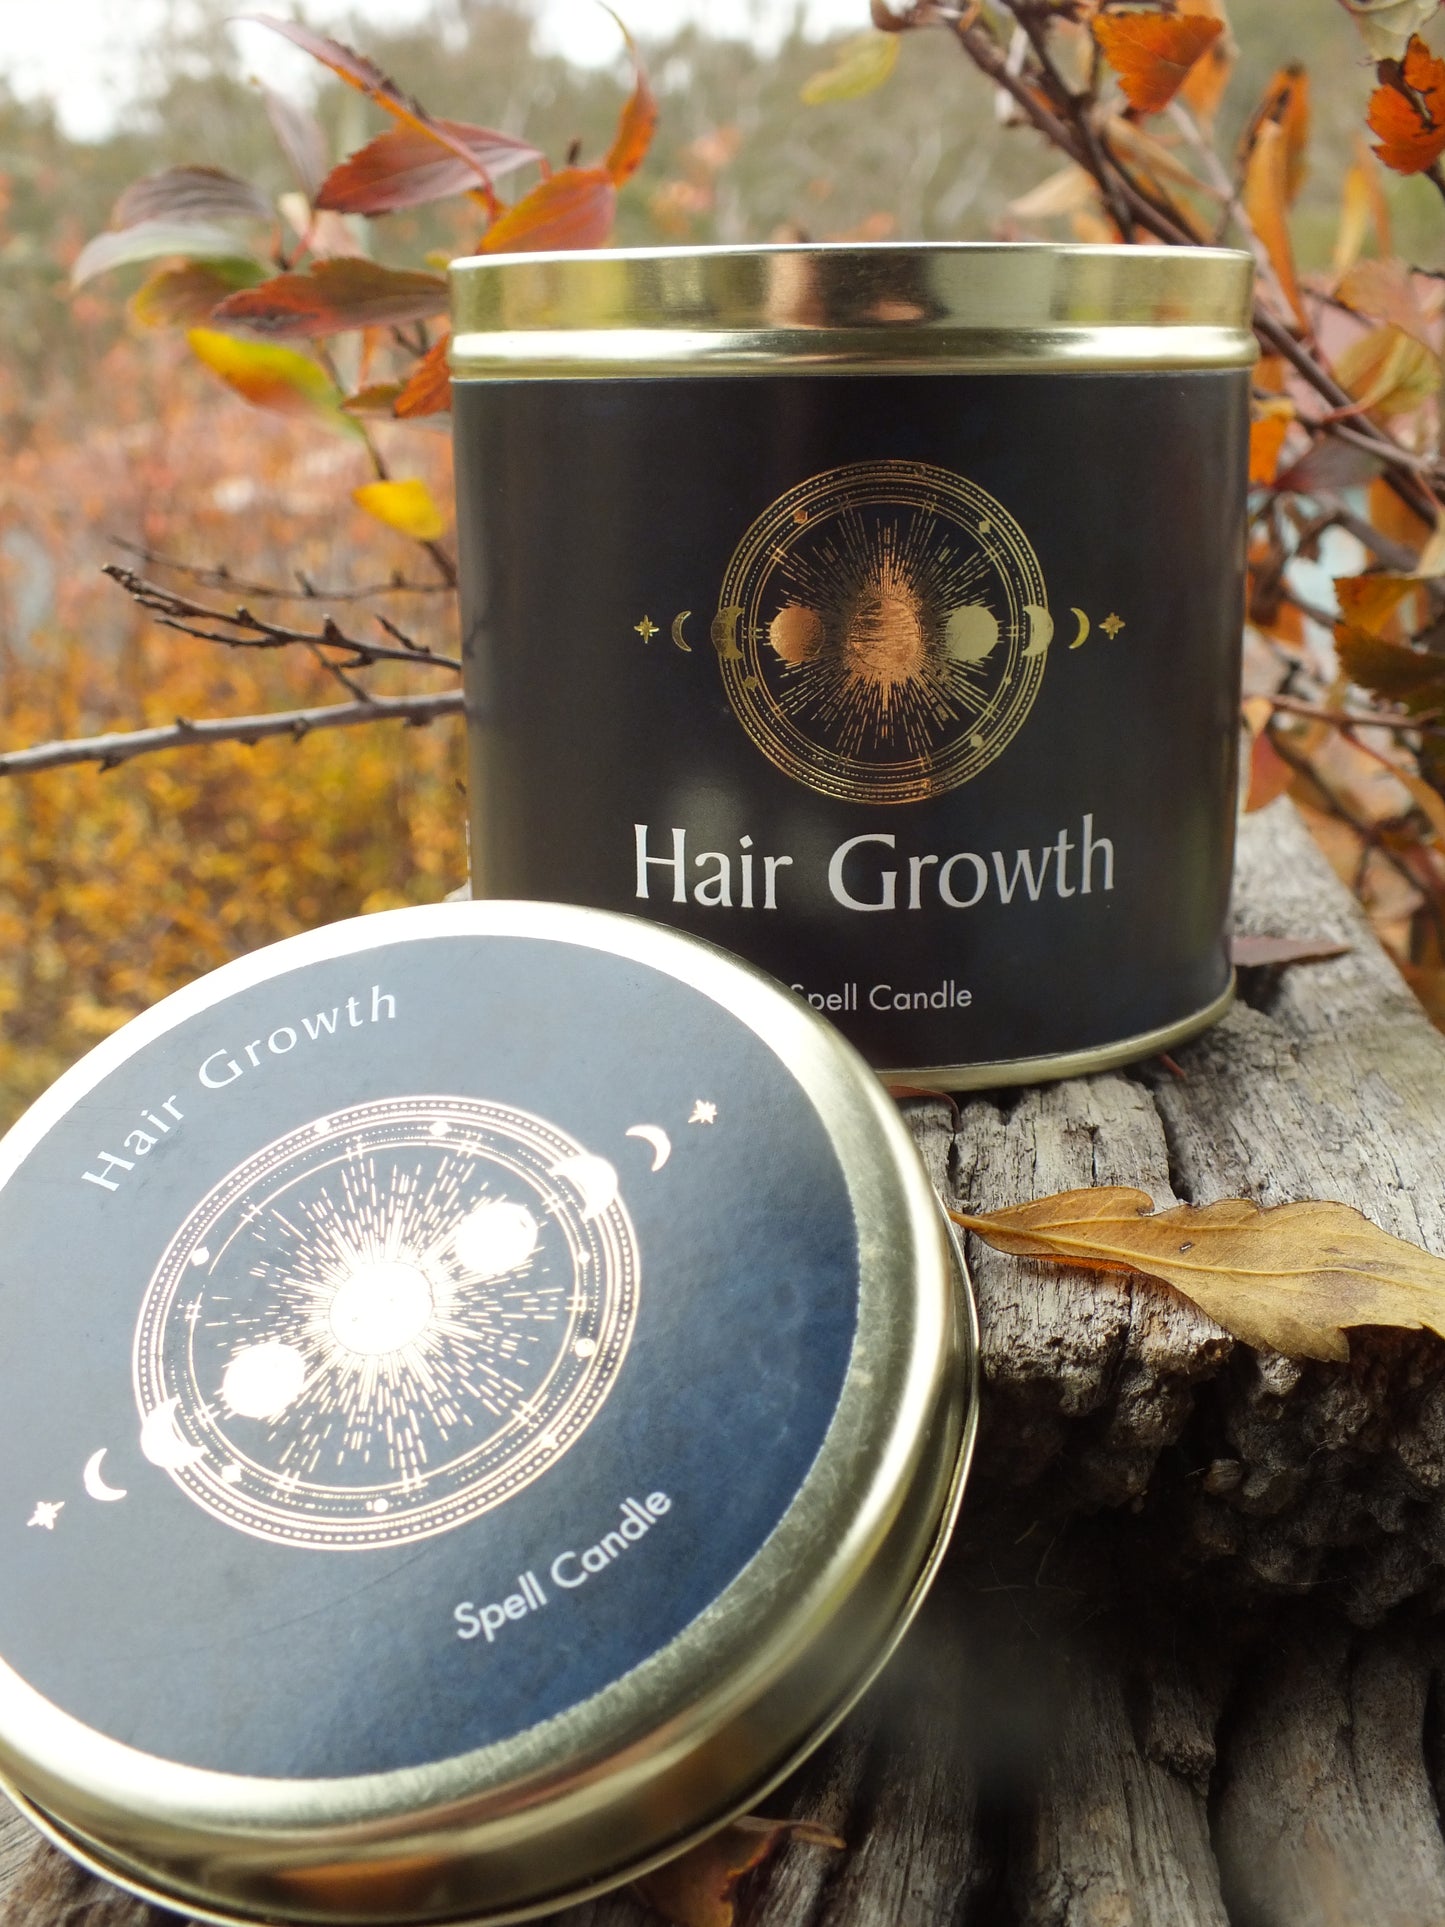 Magic Spell Candle - Hair Growth